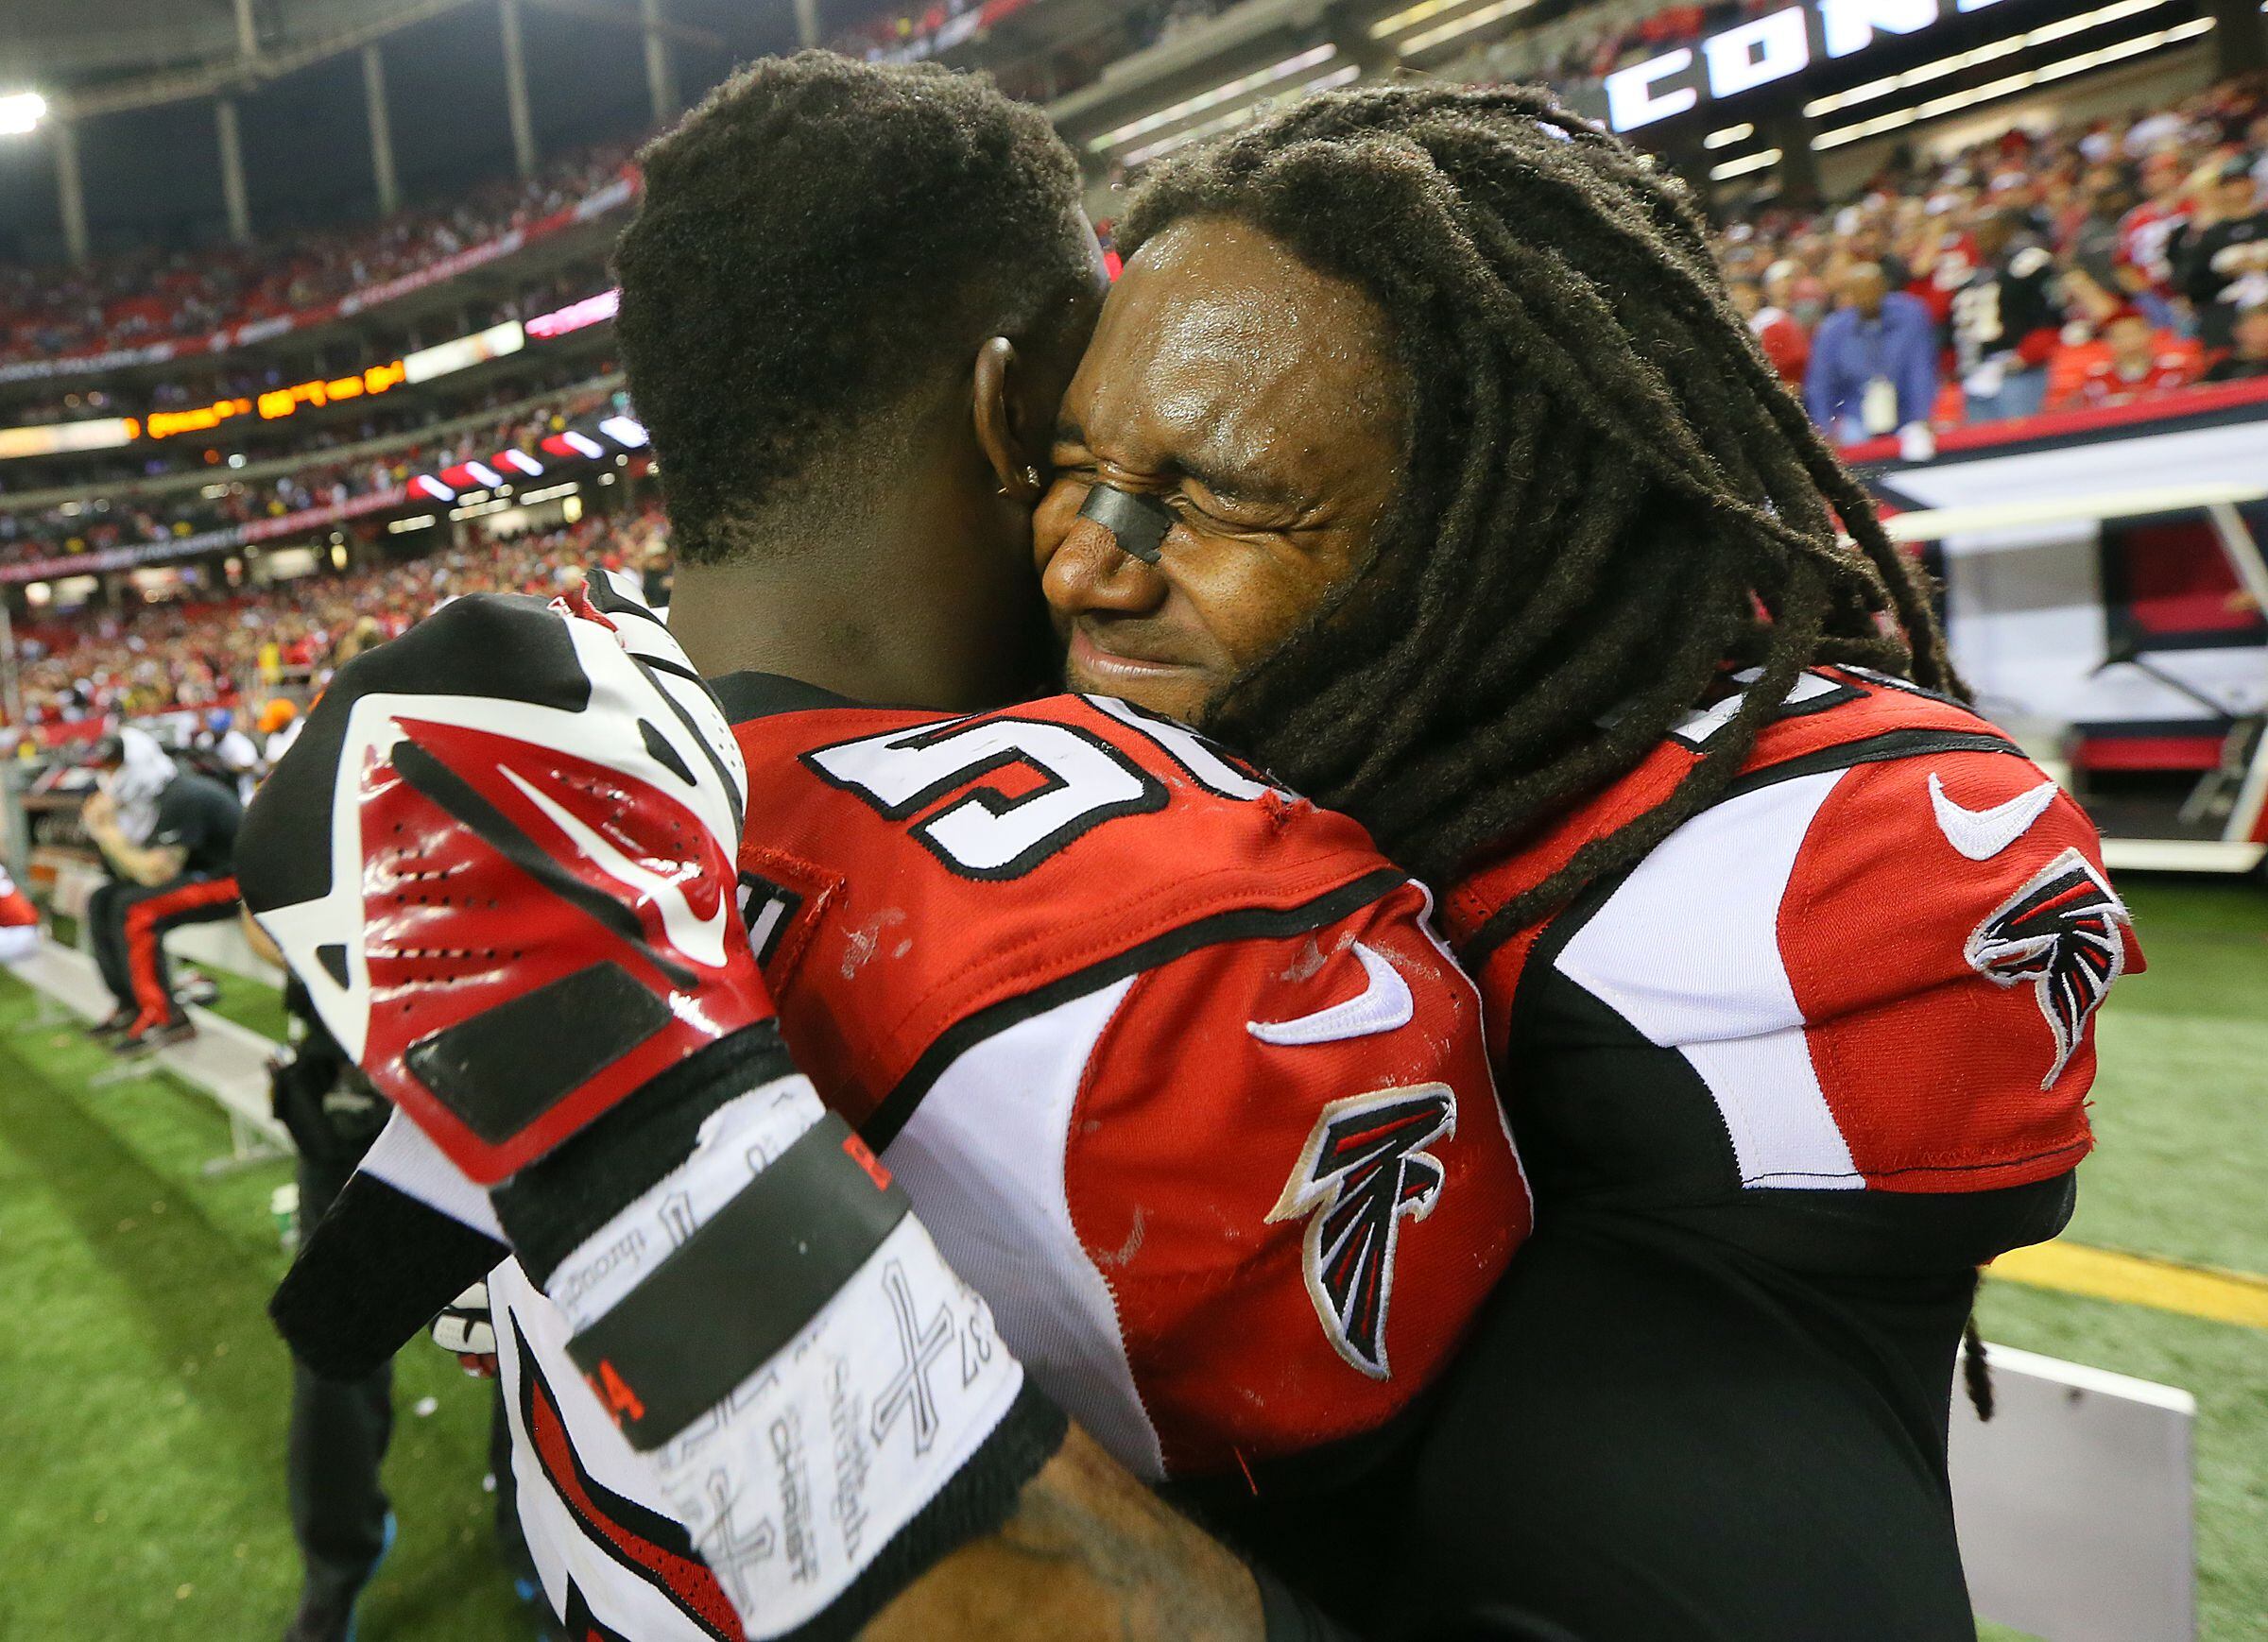 Falcons blow big lead, lose 28-24 to 49ers